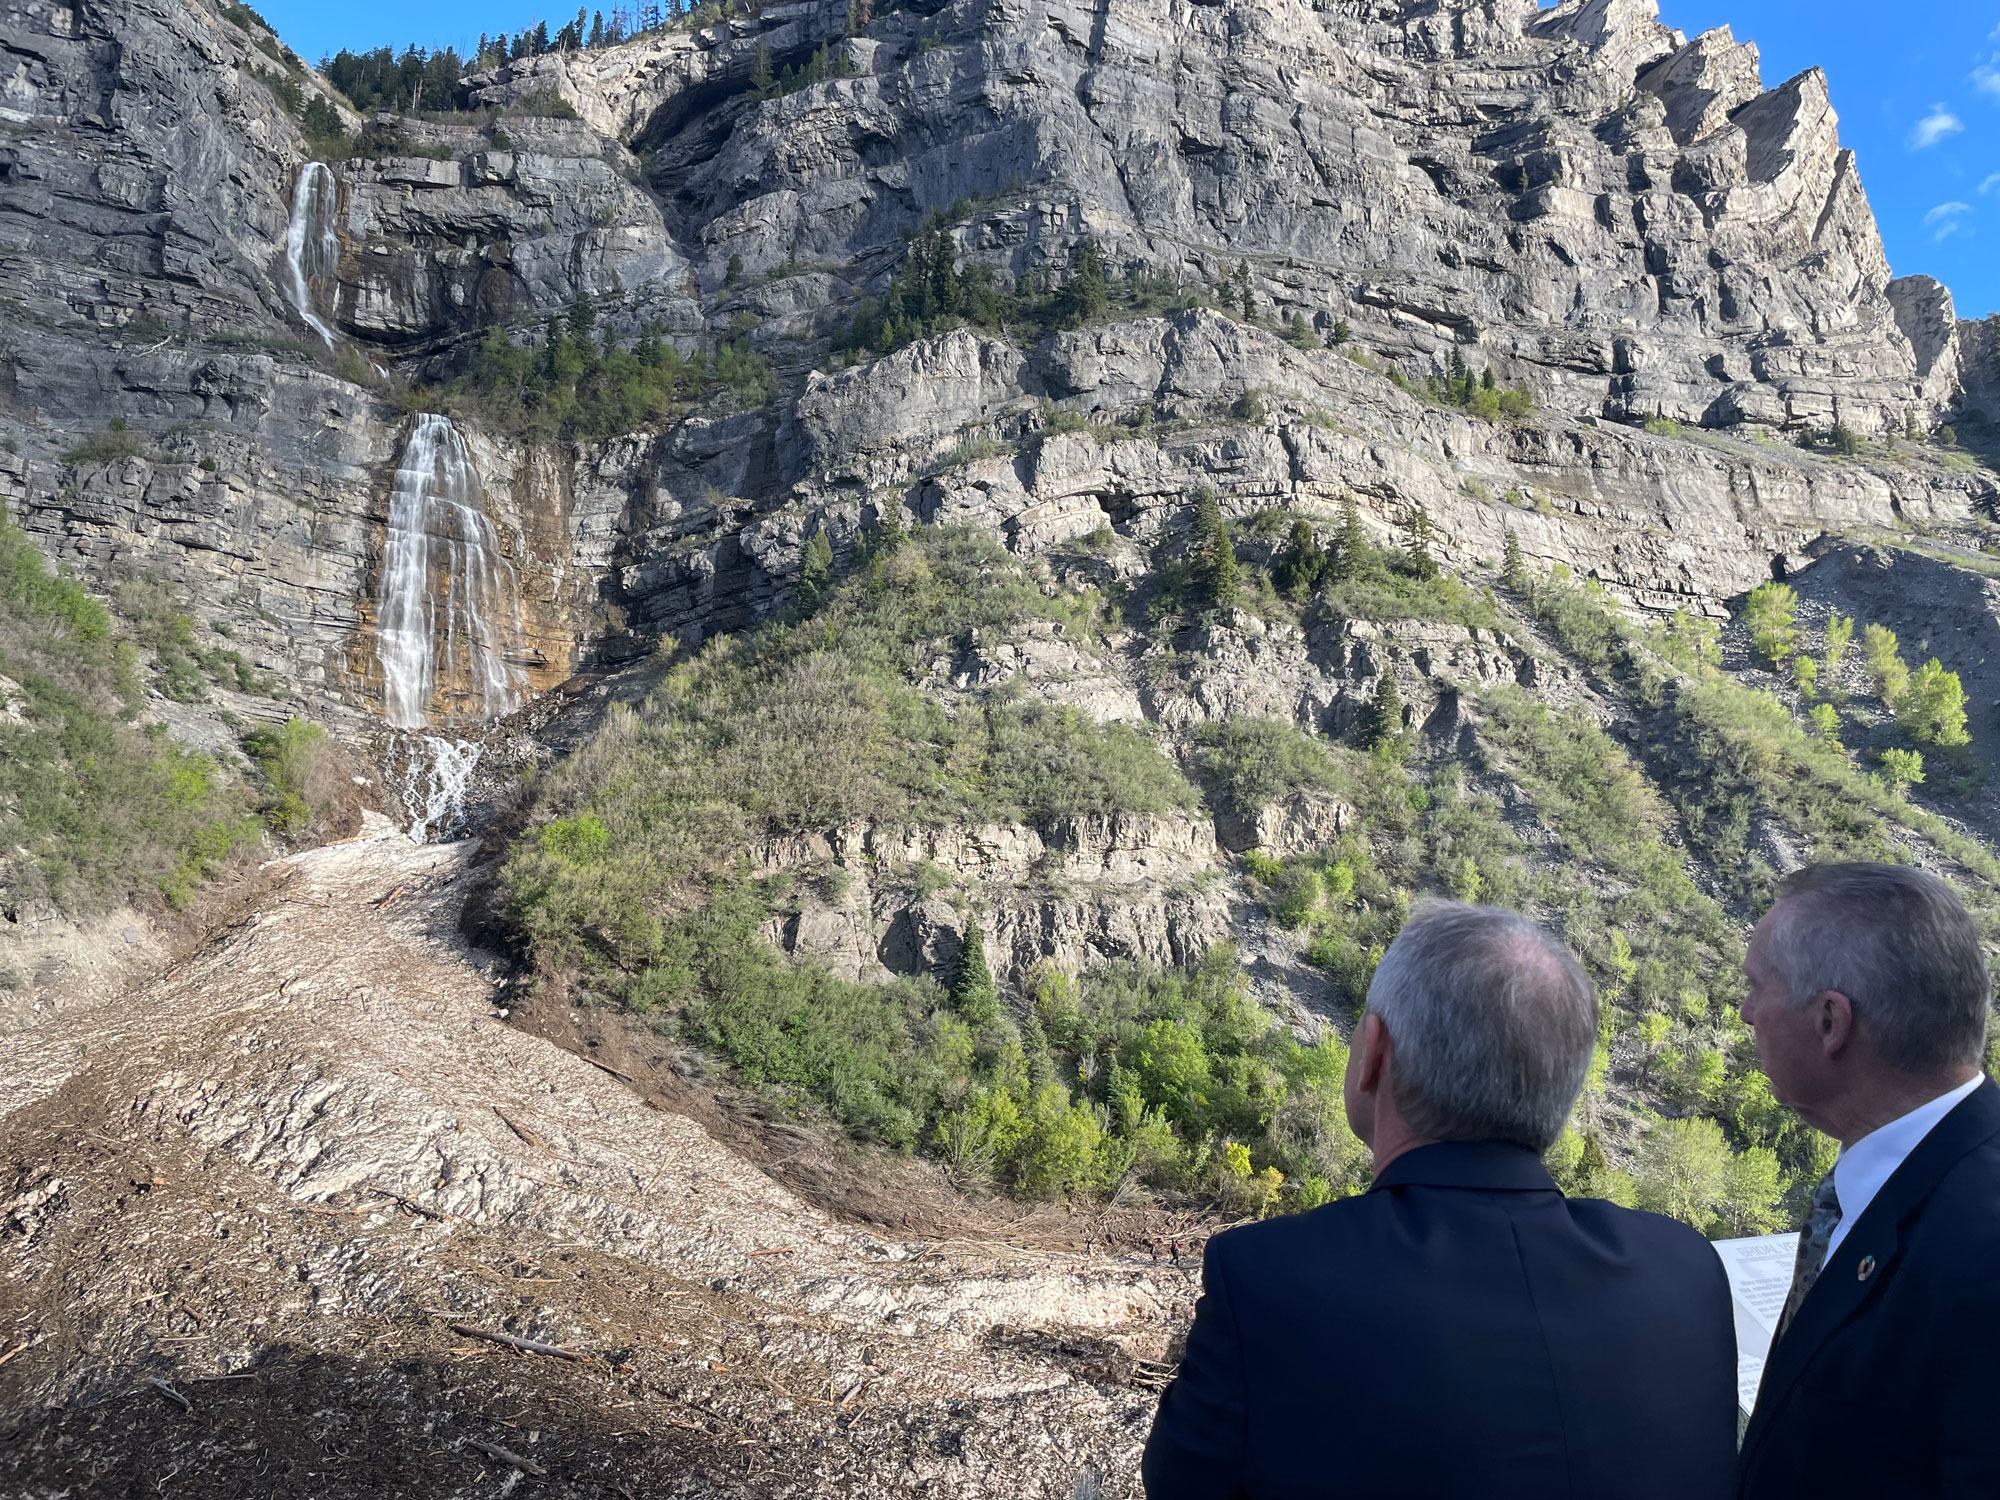 General Assembly President Csaba Kőrösi admires the beauty of a waterfall in Provo, Utah, during his official visit to the state.